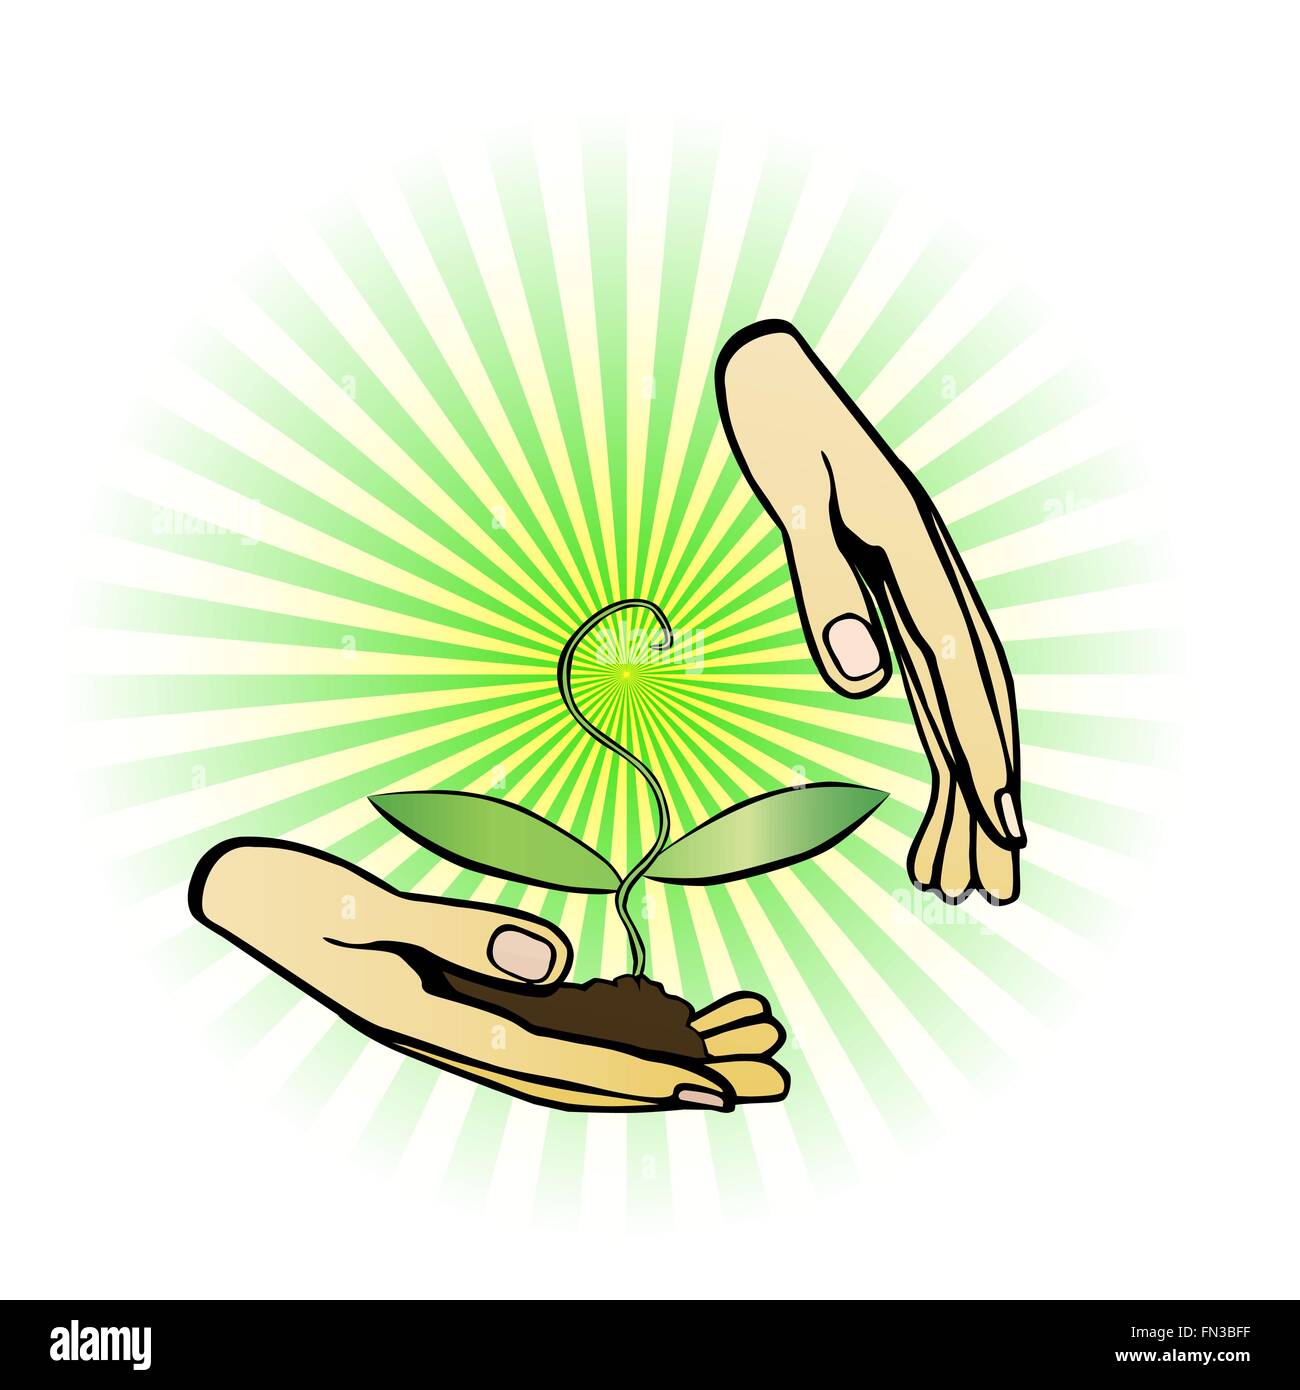 Care about the environment. Hands gently holding the plant before planting. Stock Vector